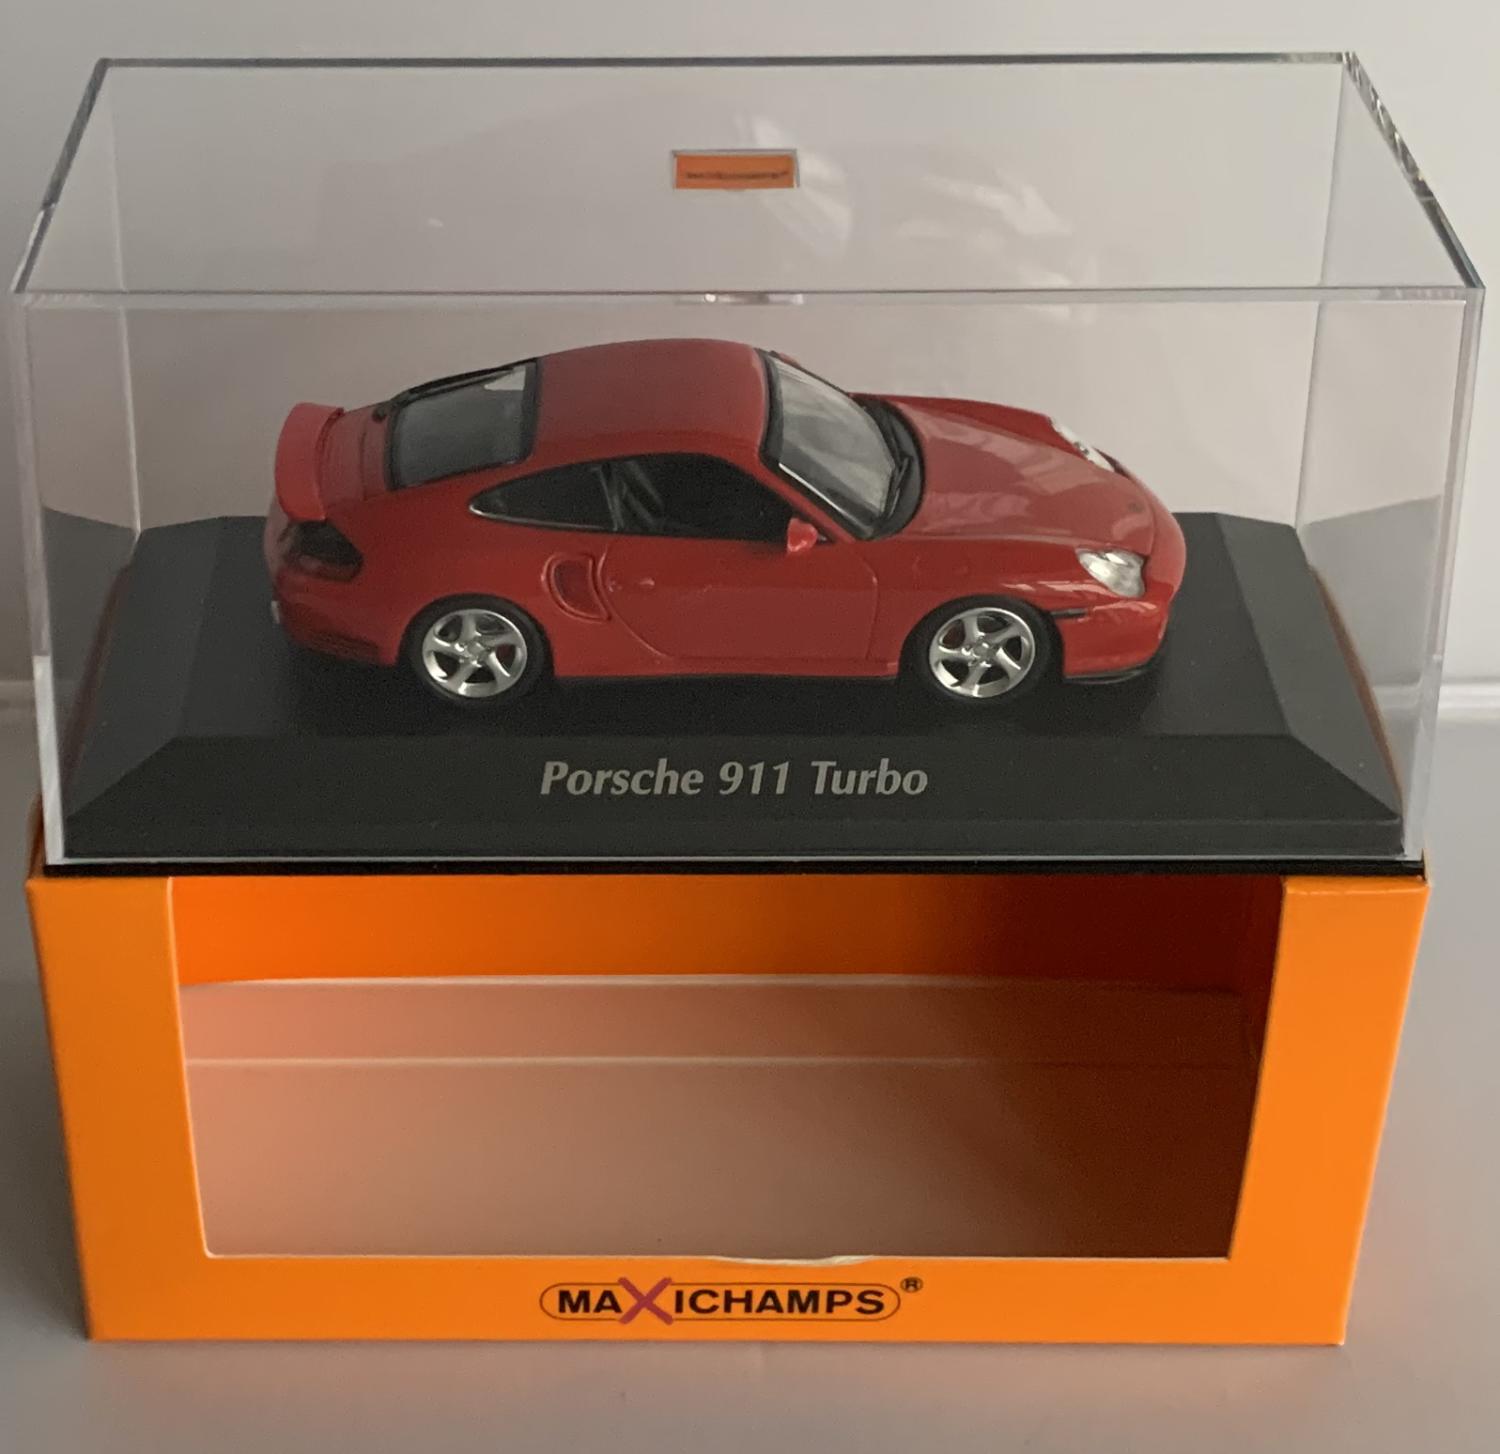 n excellent reproduction of the Porsche 911 Turbo with detail throughout, all authentically recreated.  Model is mounted on a removable plinth with a removable hard plastic cover and presented in Maxichamps  packaging